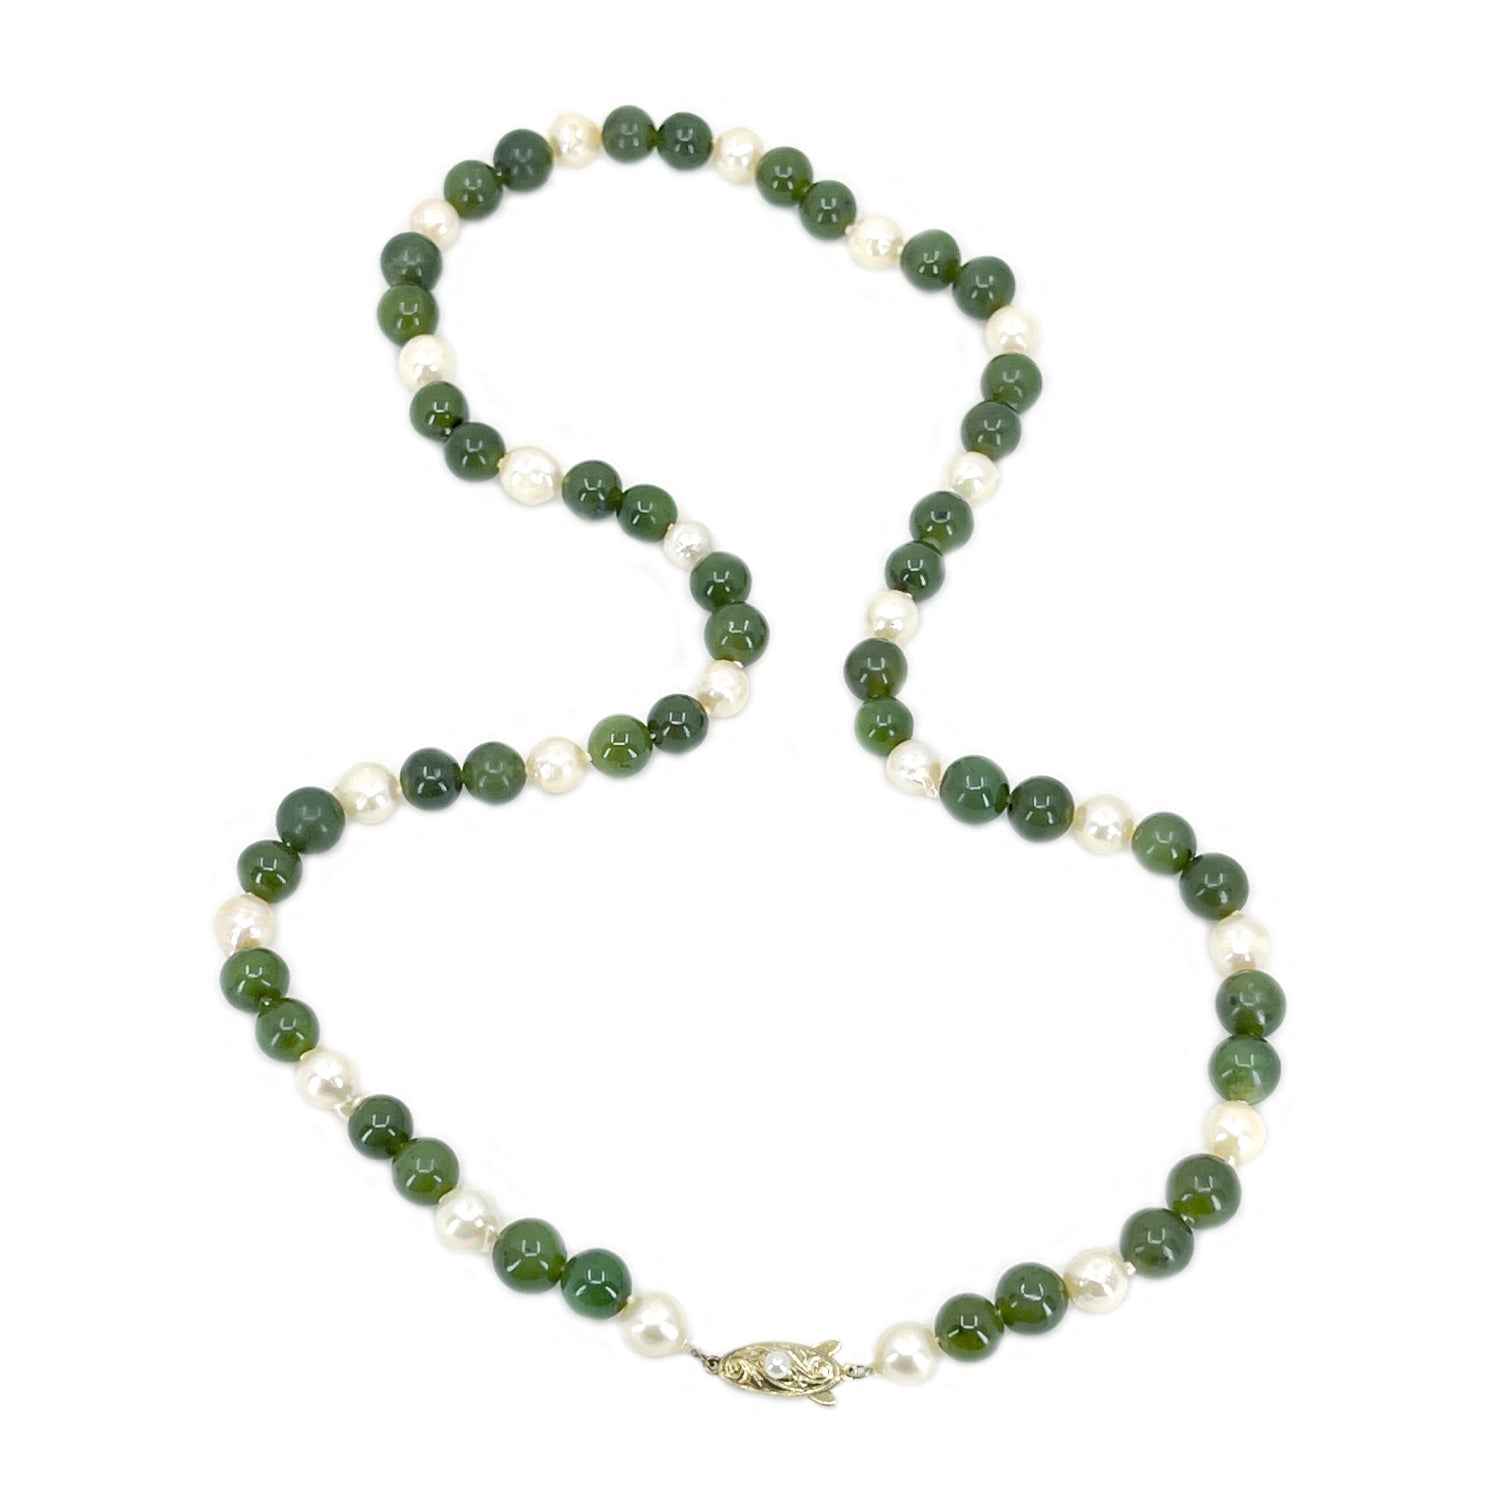 Vintage Nephrite Green Jade Japanese Saltwater Cultured Akoya Pearl Necklace- Sterling Silver Gold Plate 22 Inch